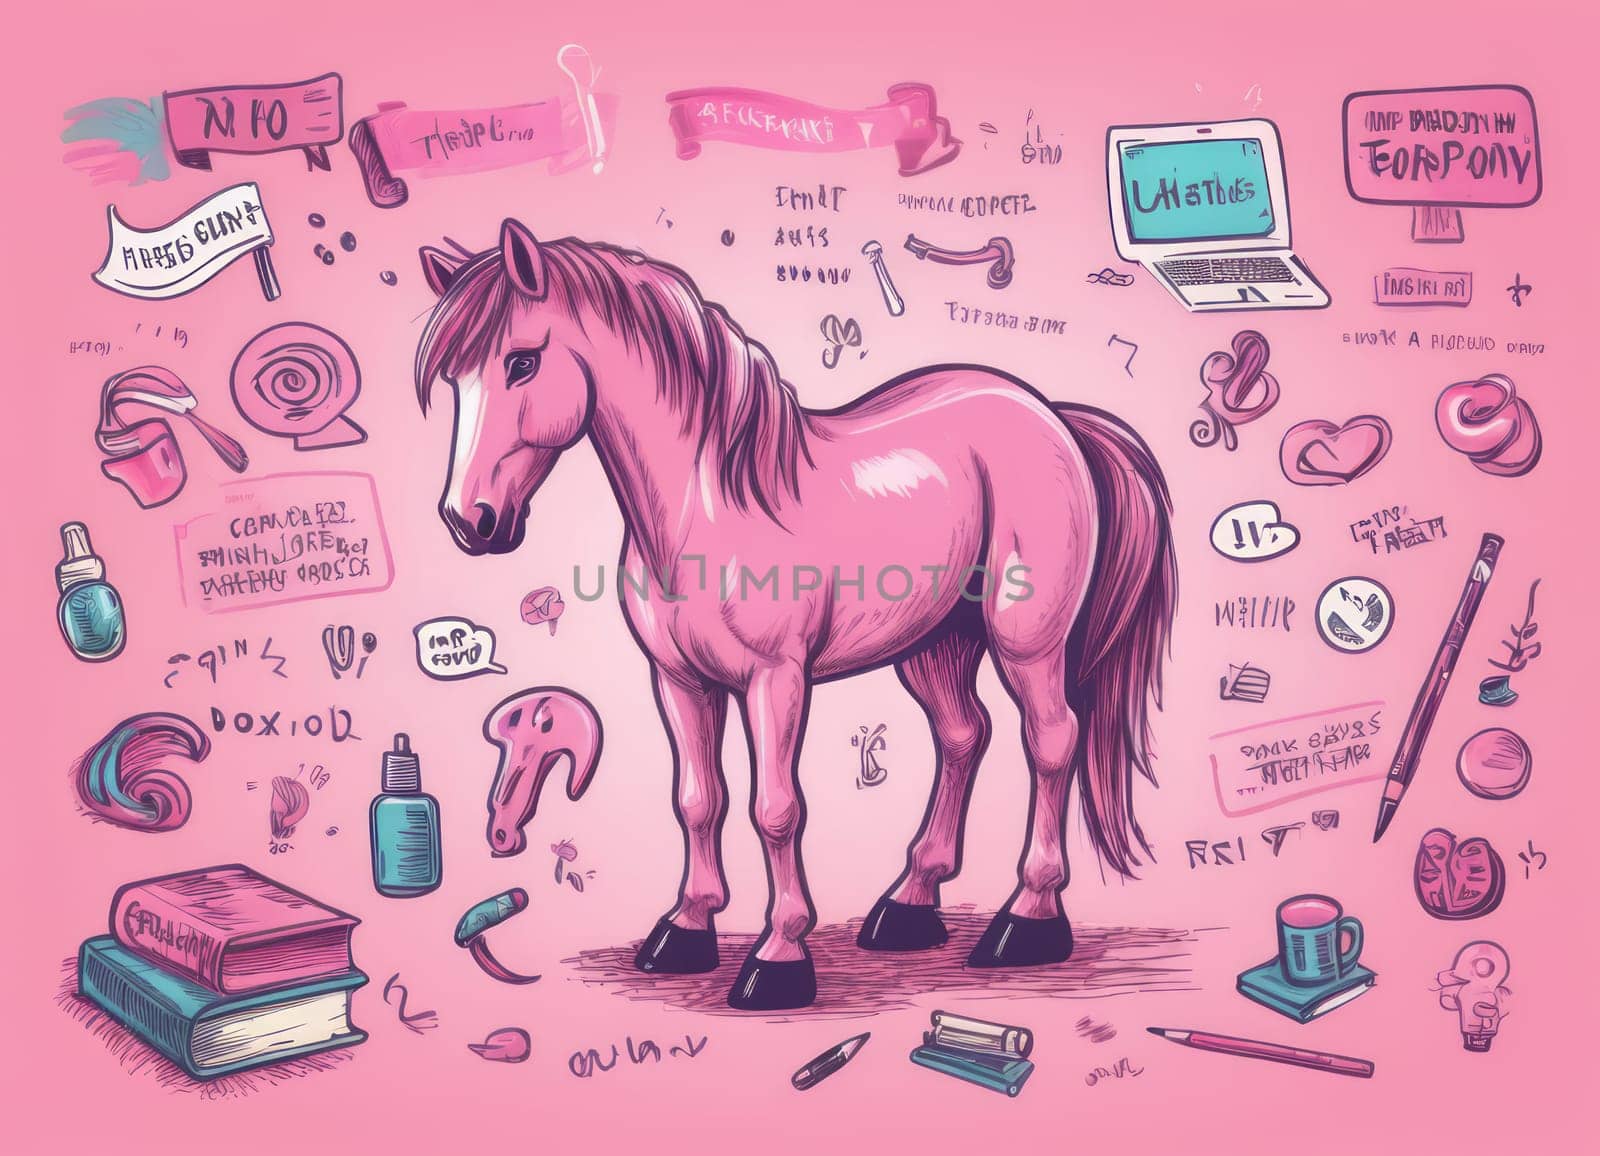 A whimsical and artistic image of a pink horse surrounded by various objects creating an eclectic and abstract theme. The image is set against a pink background that complements the color scheme of the illustration.